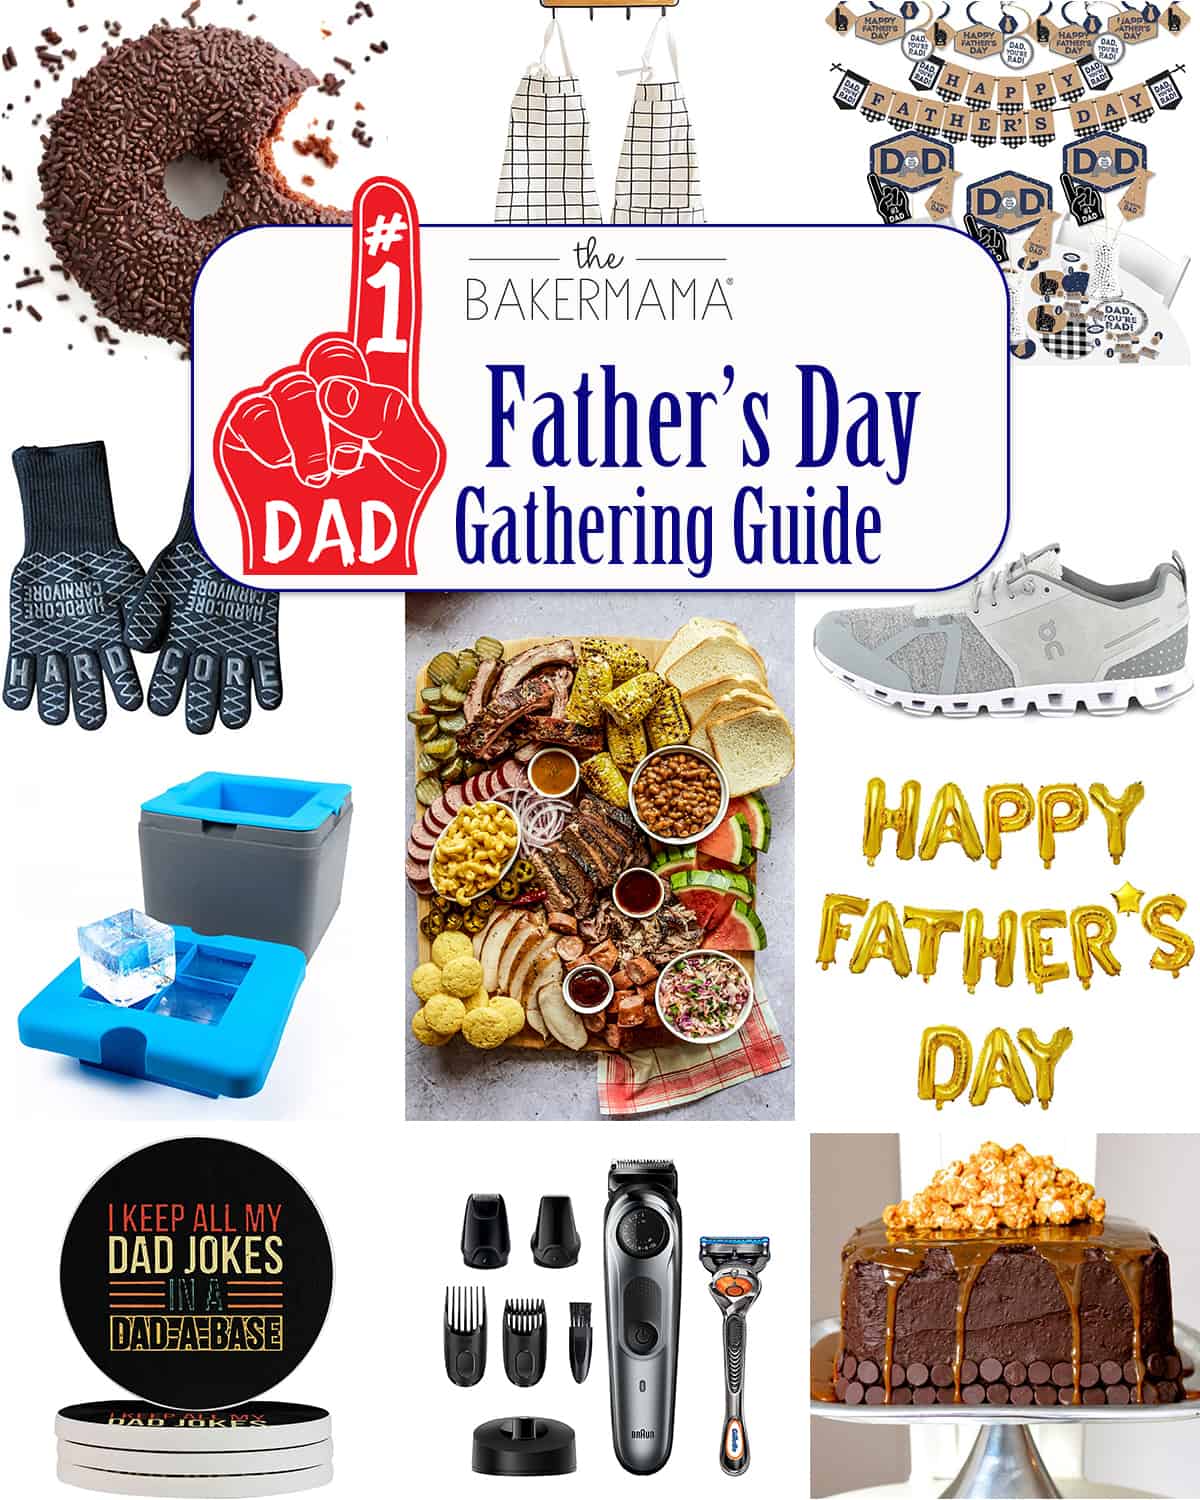 https://thebakermama.com/wp-content/uploads/2021/06/Fathers-Day-Gathering-Guide-copy-1.jpg